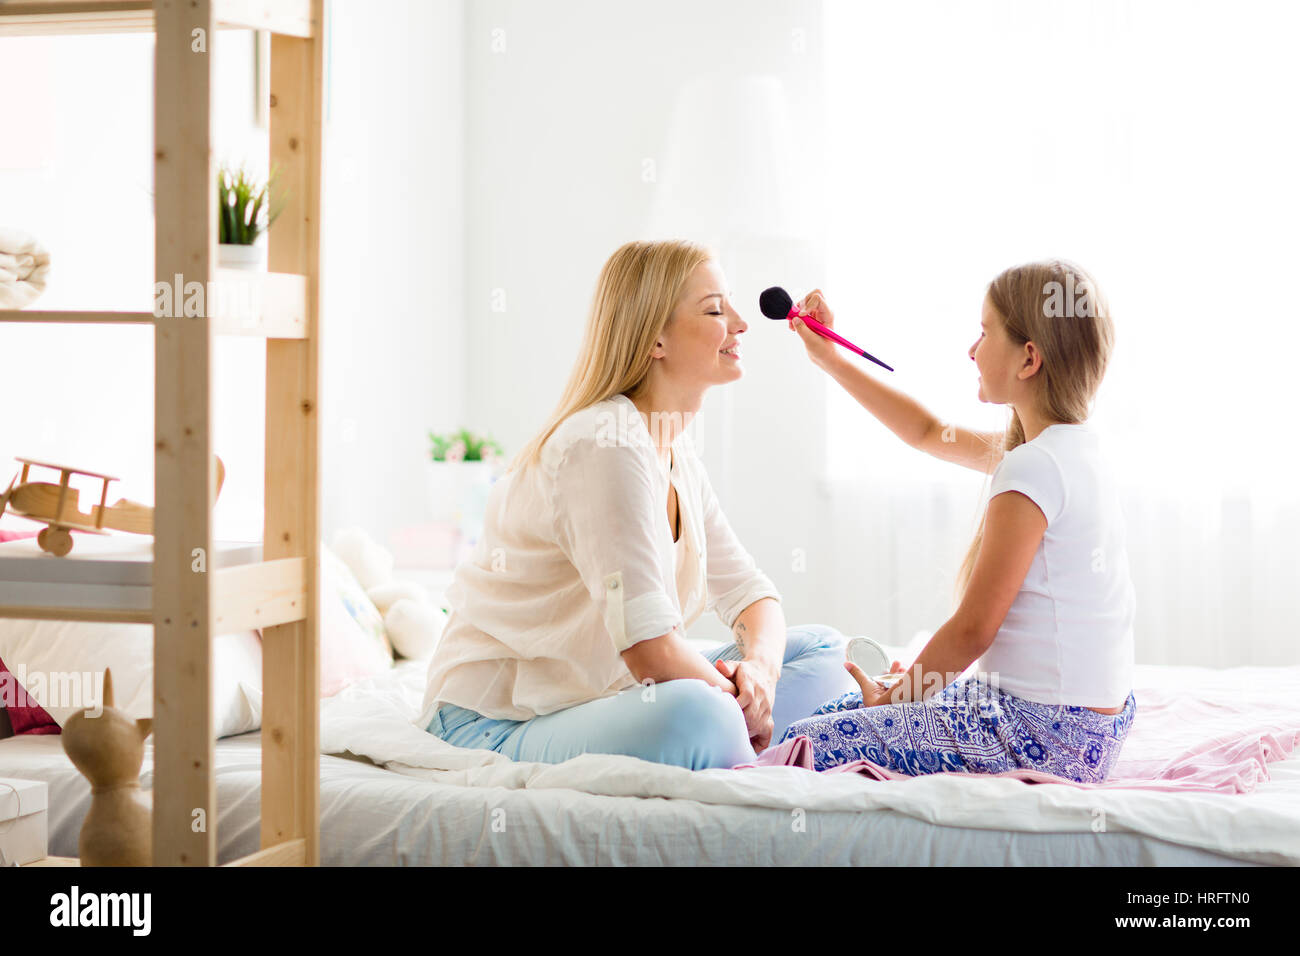 Teenage daughter having fun playing beauty salon with her young blond mother and putting makeup on her face with big puffy brush Stock Photo